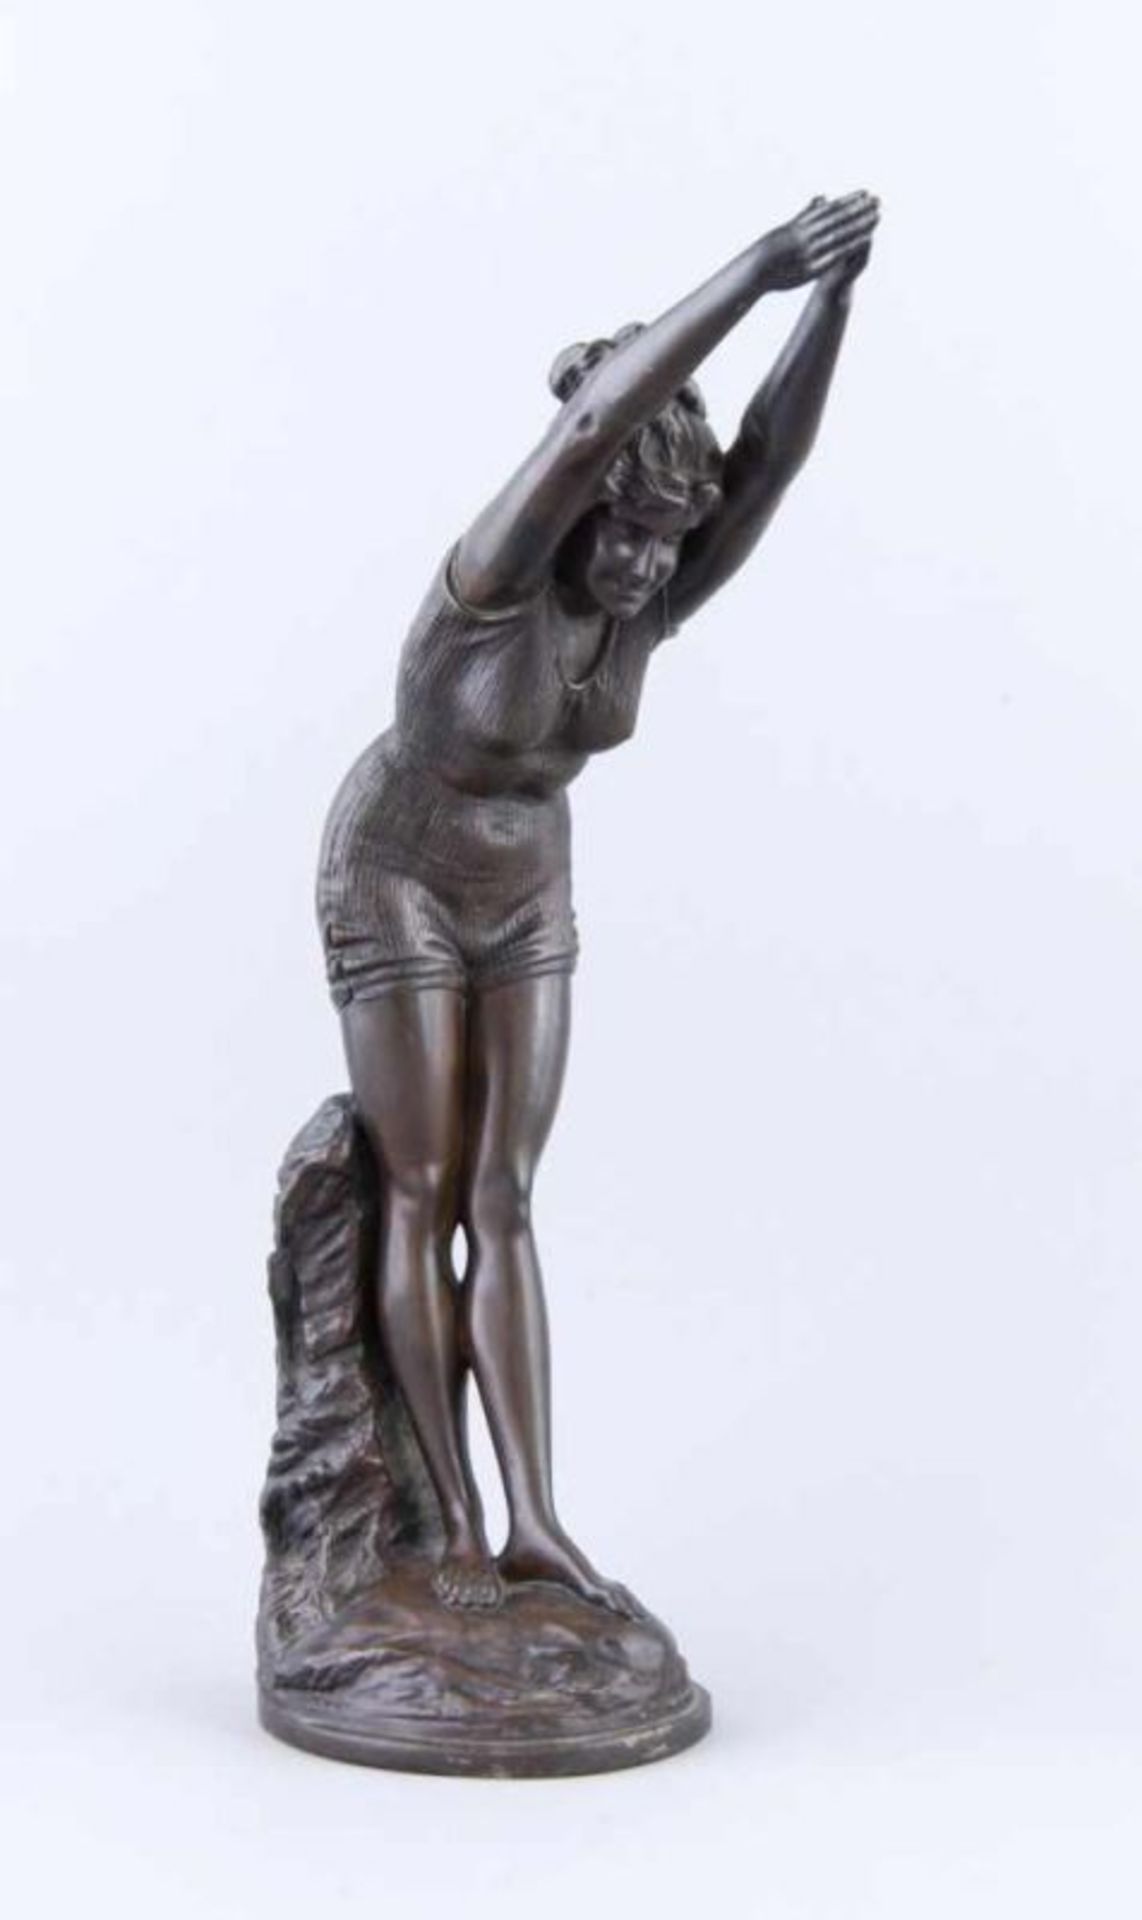 Antique bronze figure, without basement. Swimmer. By Odoardo Tabacchi. 1831 - 1905. Size: 39 cm.